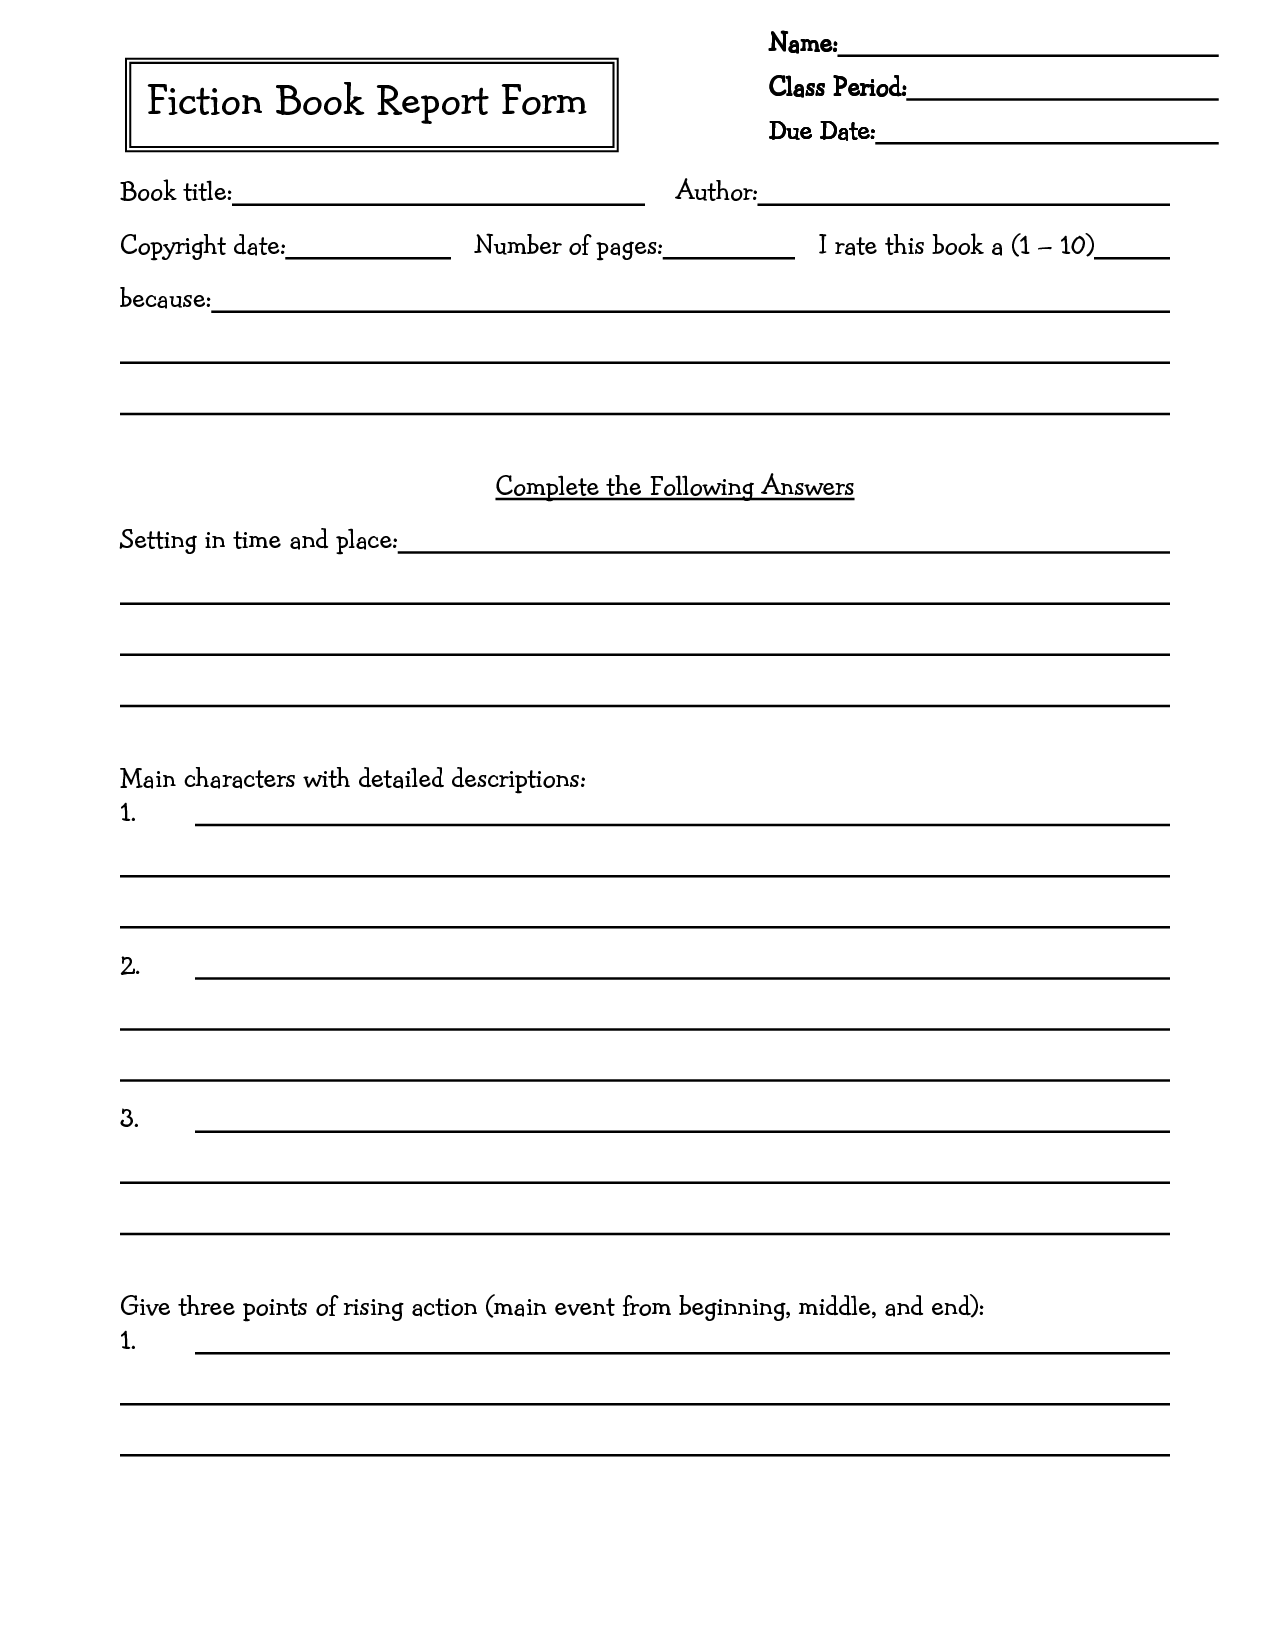 19-best-images-of-4th-grade-book-report-worksheets-3rd-grade-book